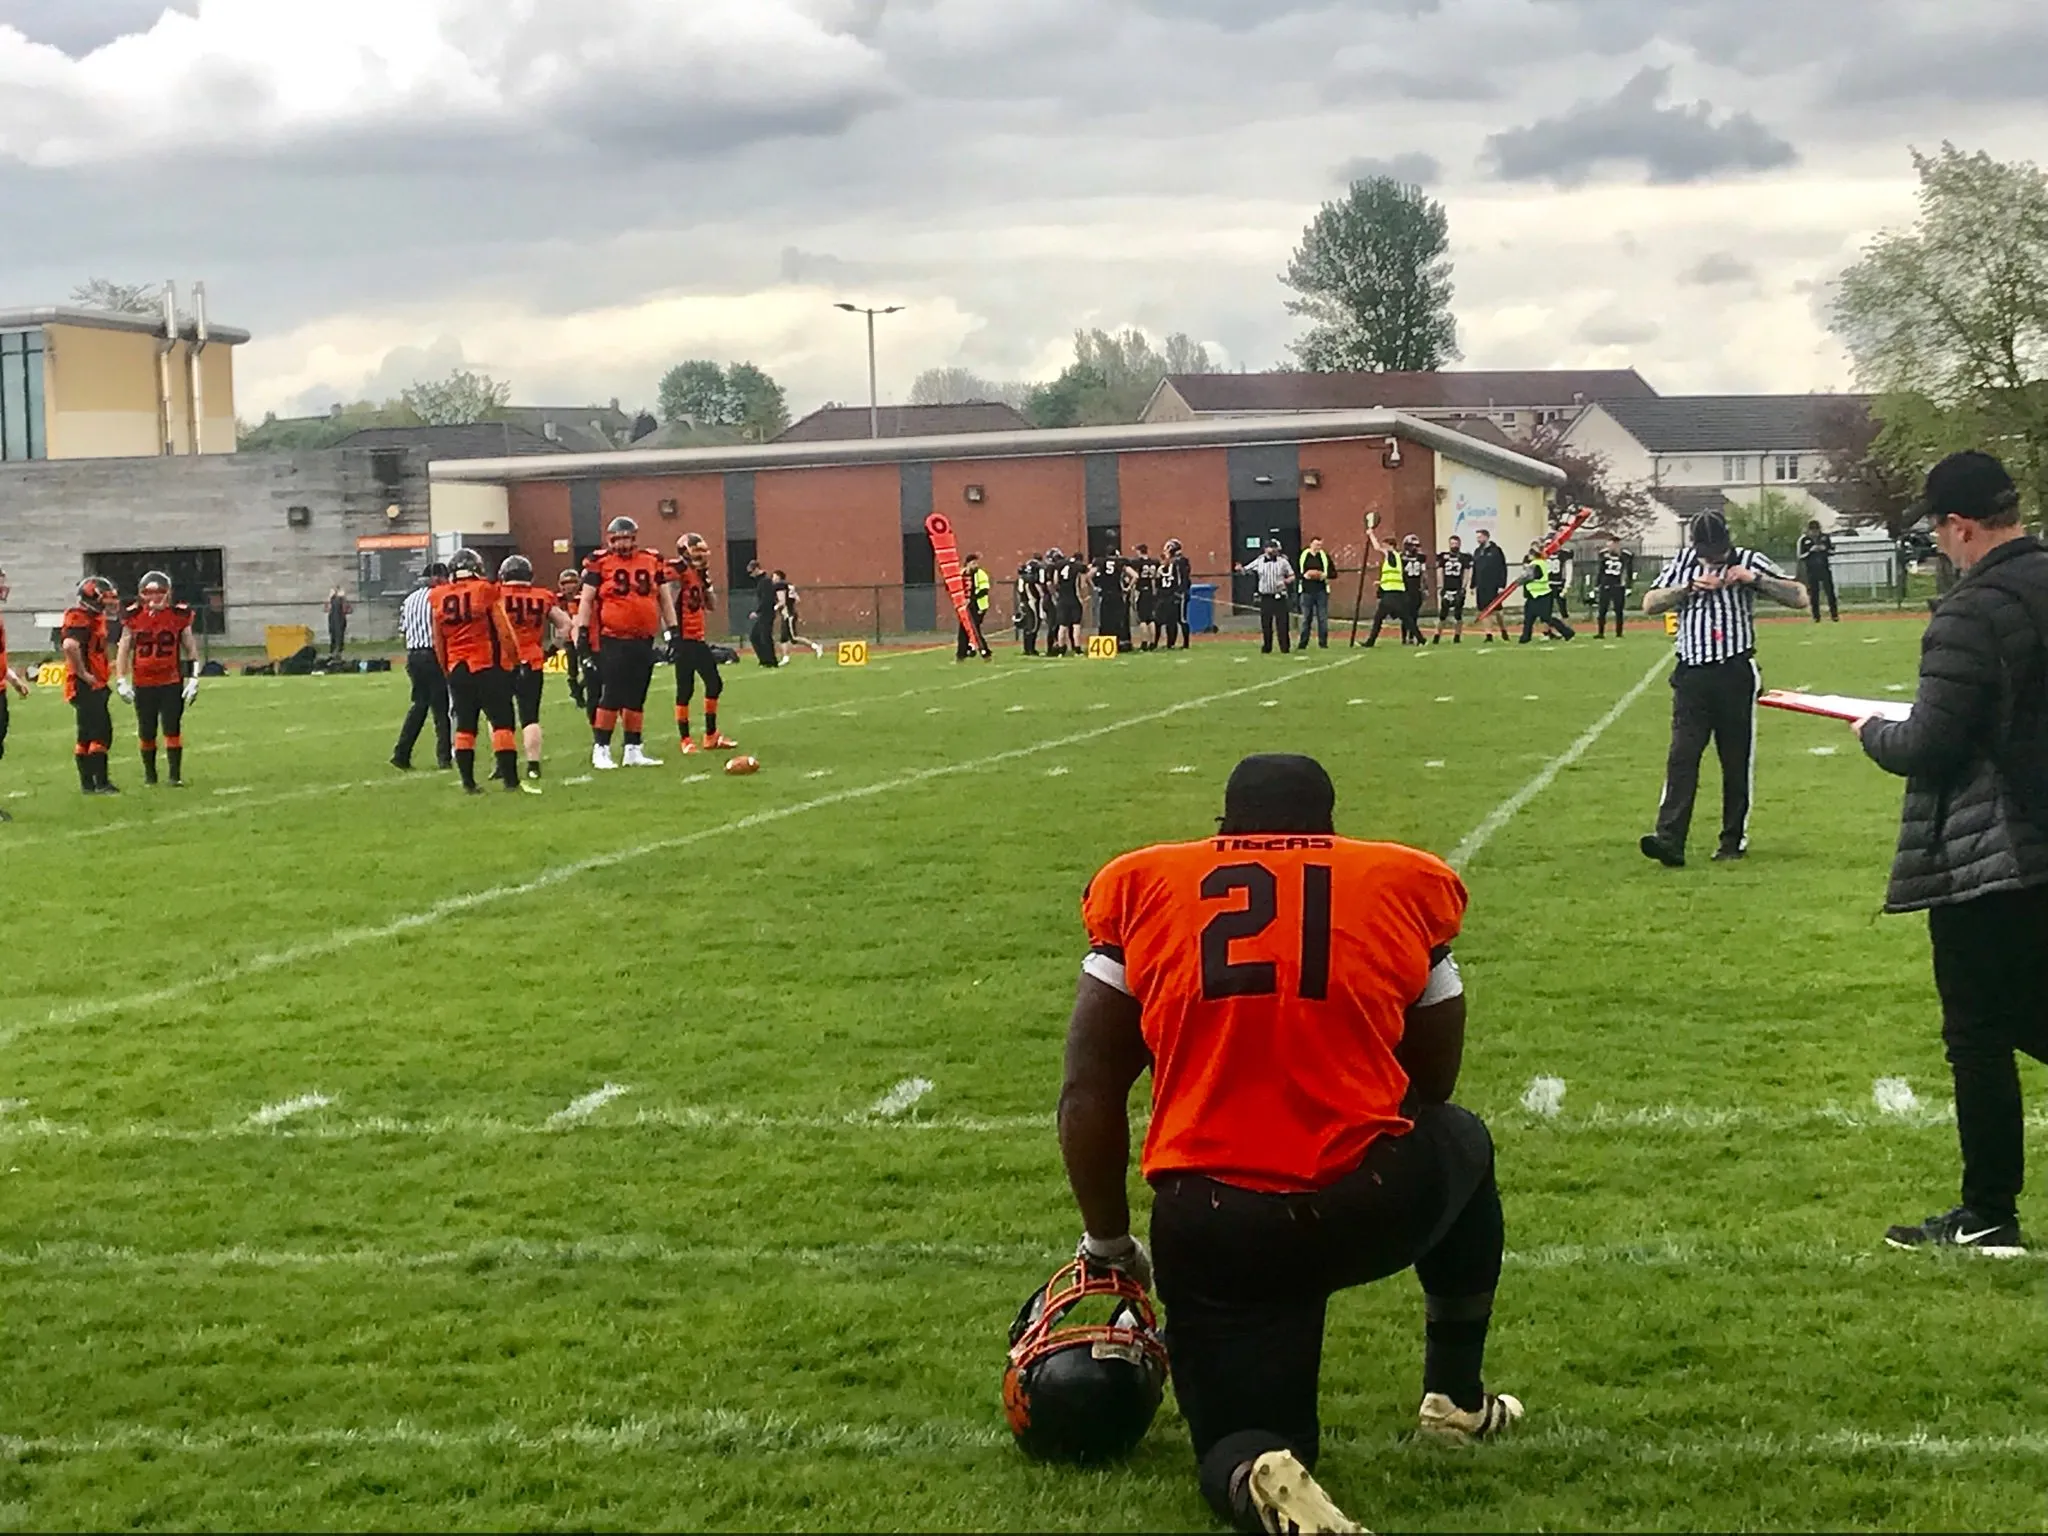 A Tigers player looks on as his team wait for the Rams offense